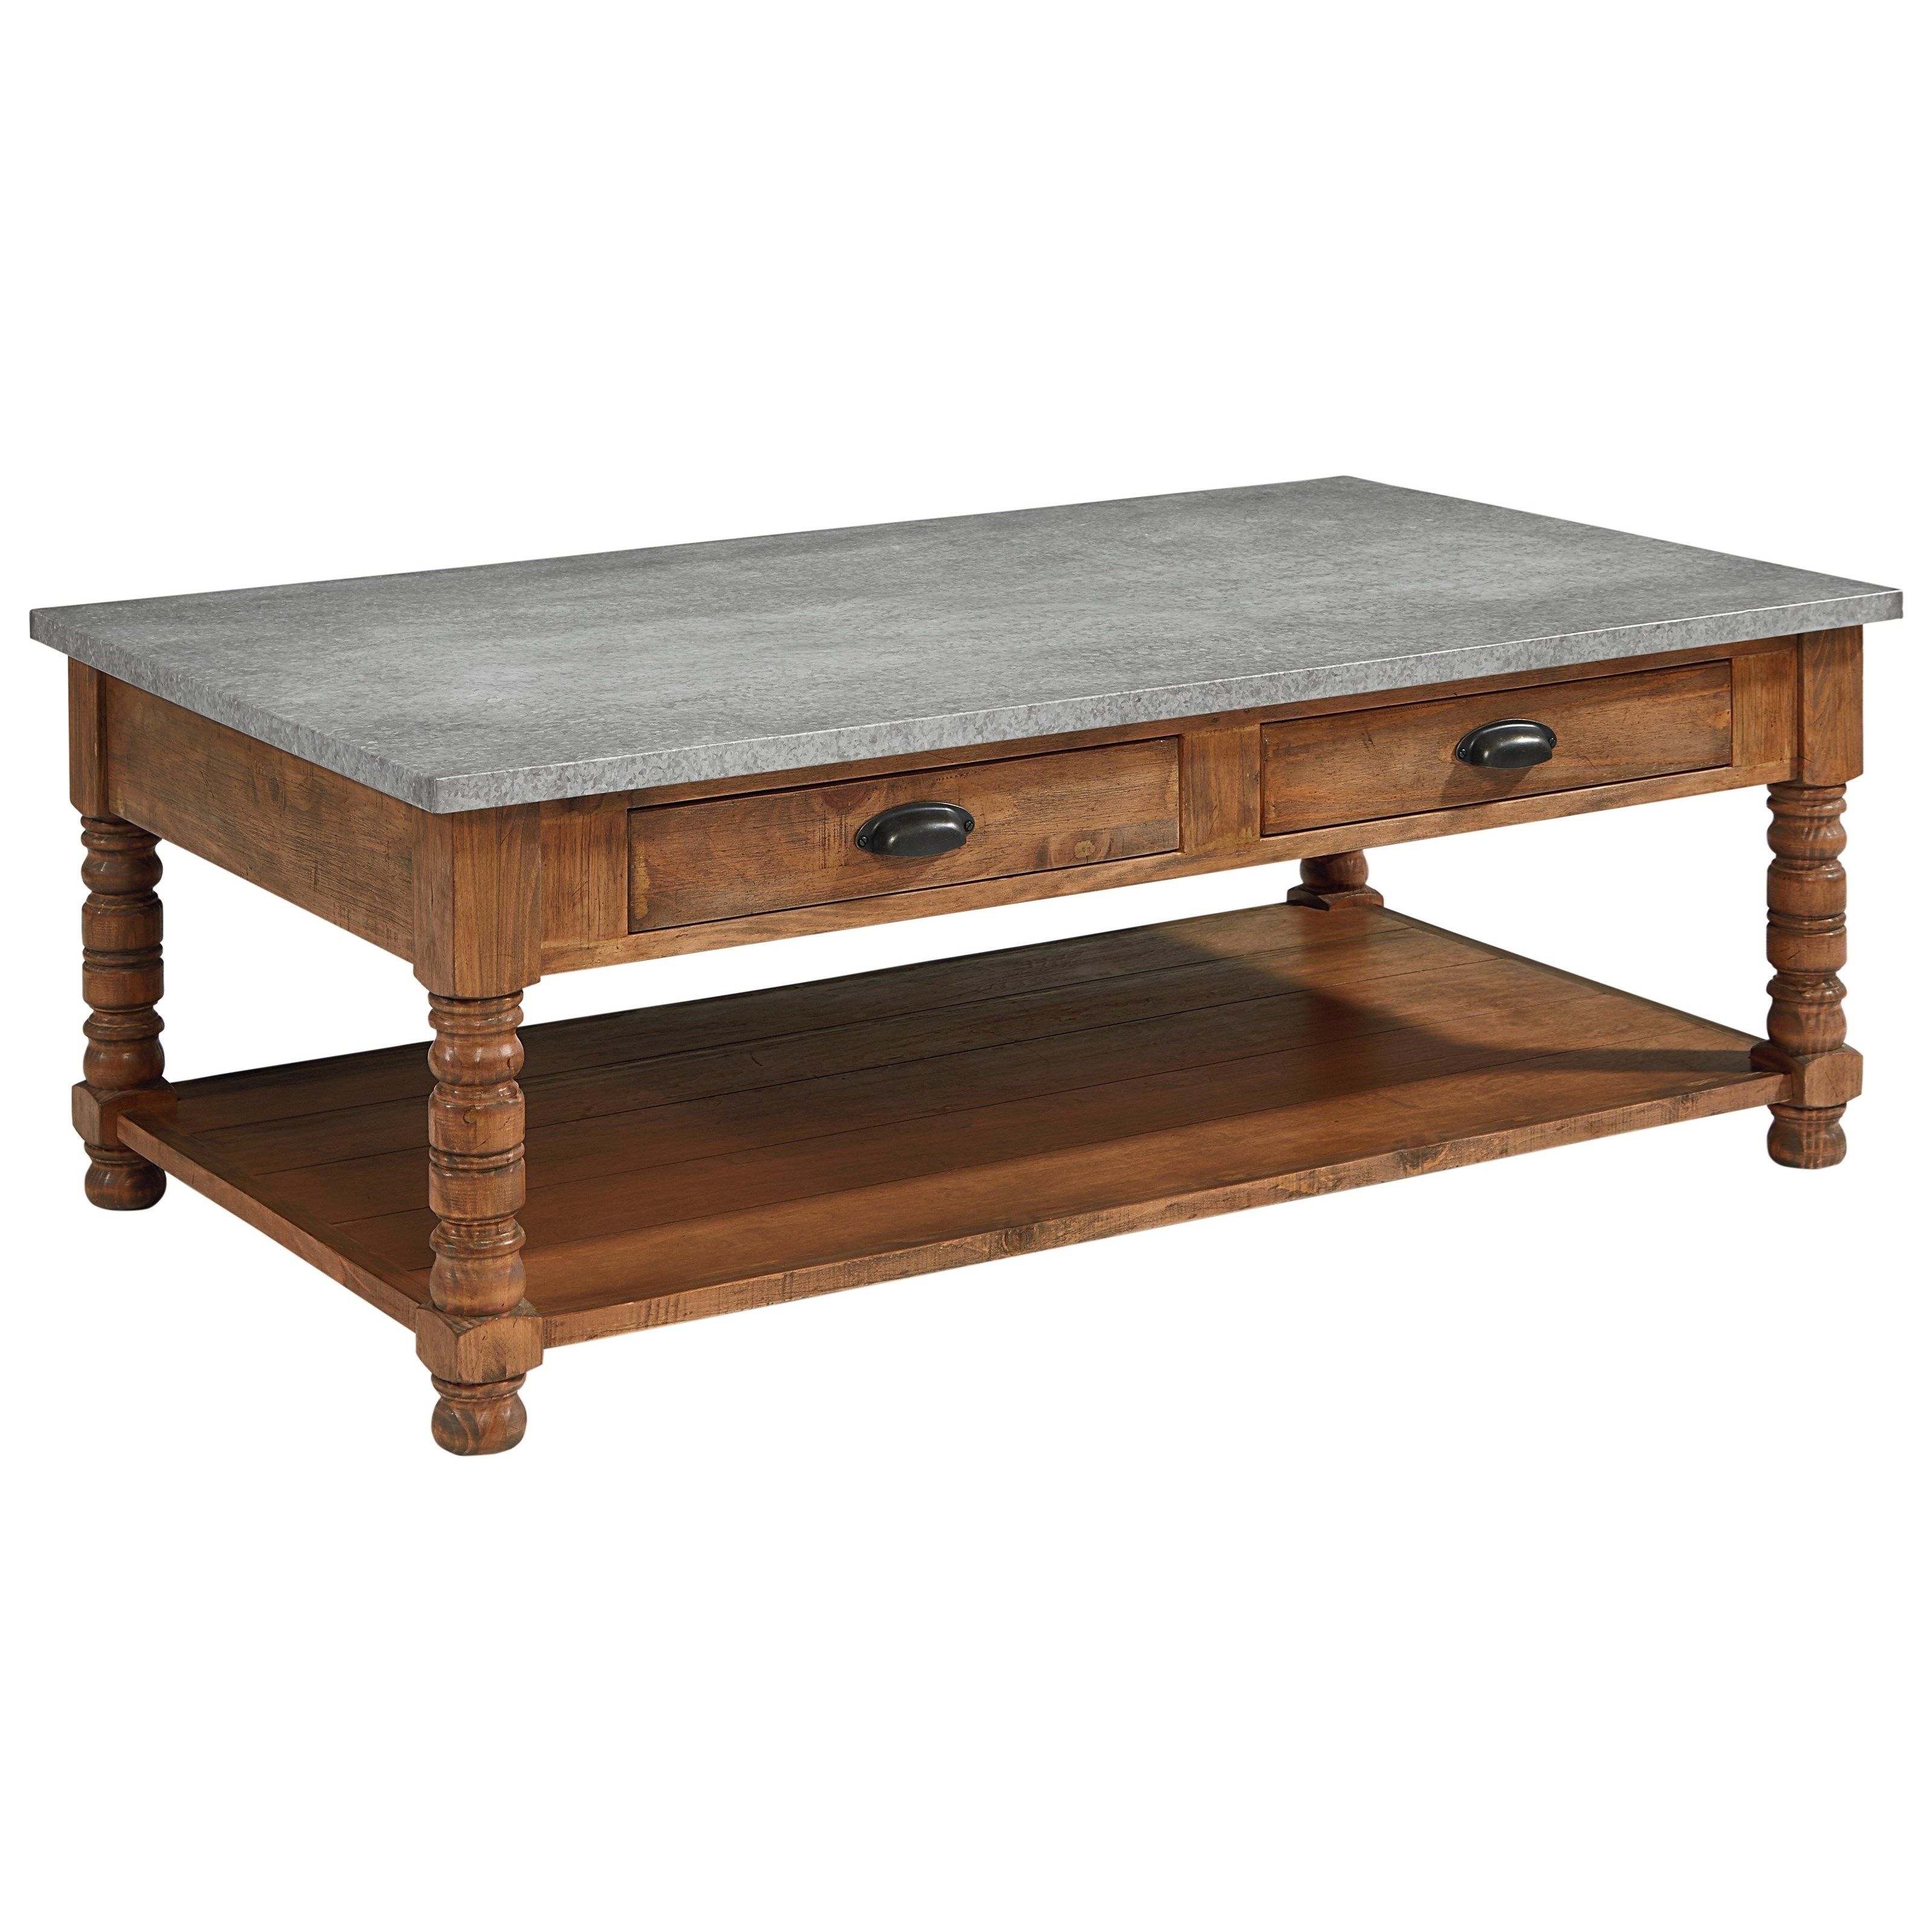 Magnolia Homejoanna Gaines Primitive Bobbin Coffee Table Throughout Most Popular Magnolia Home Top Tier Round Dining Tables (View 10 of 20)